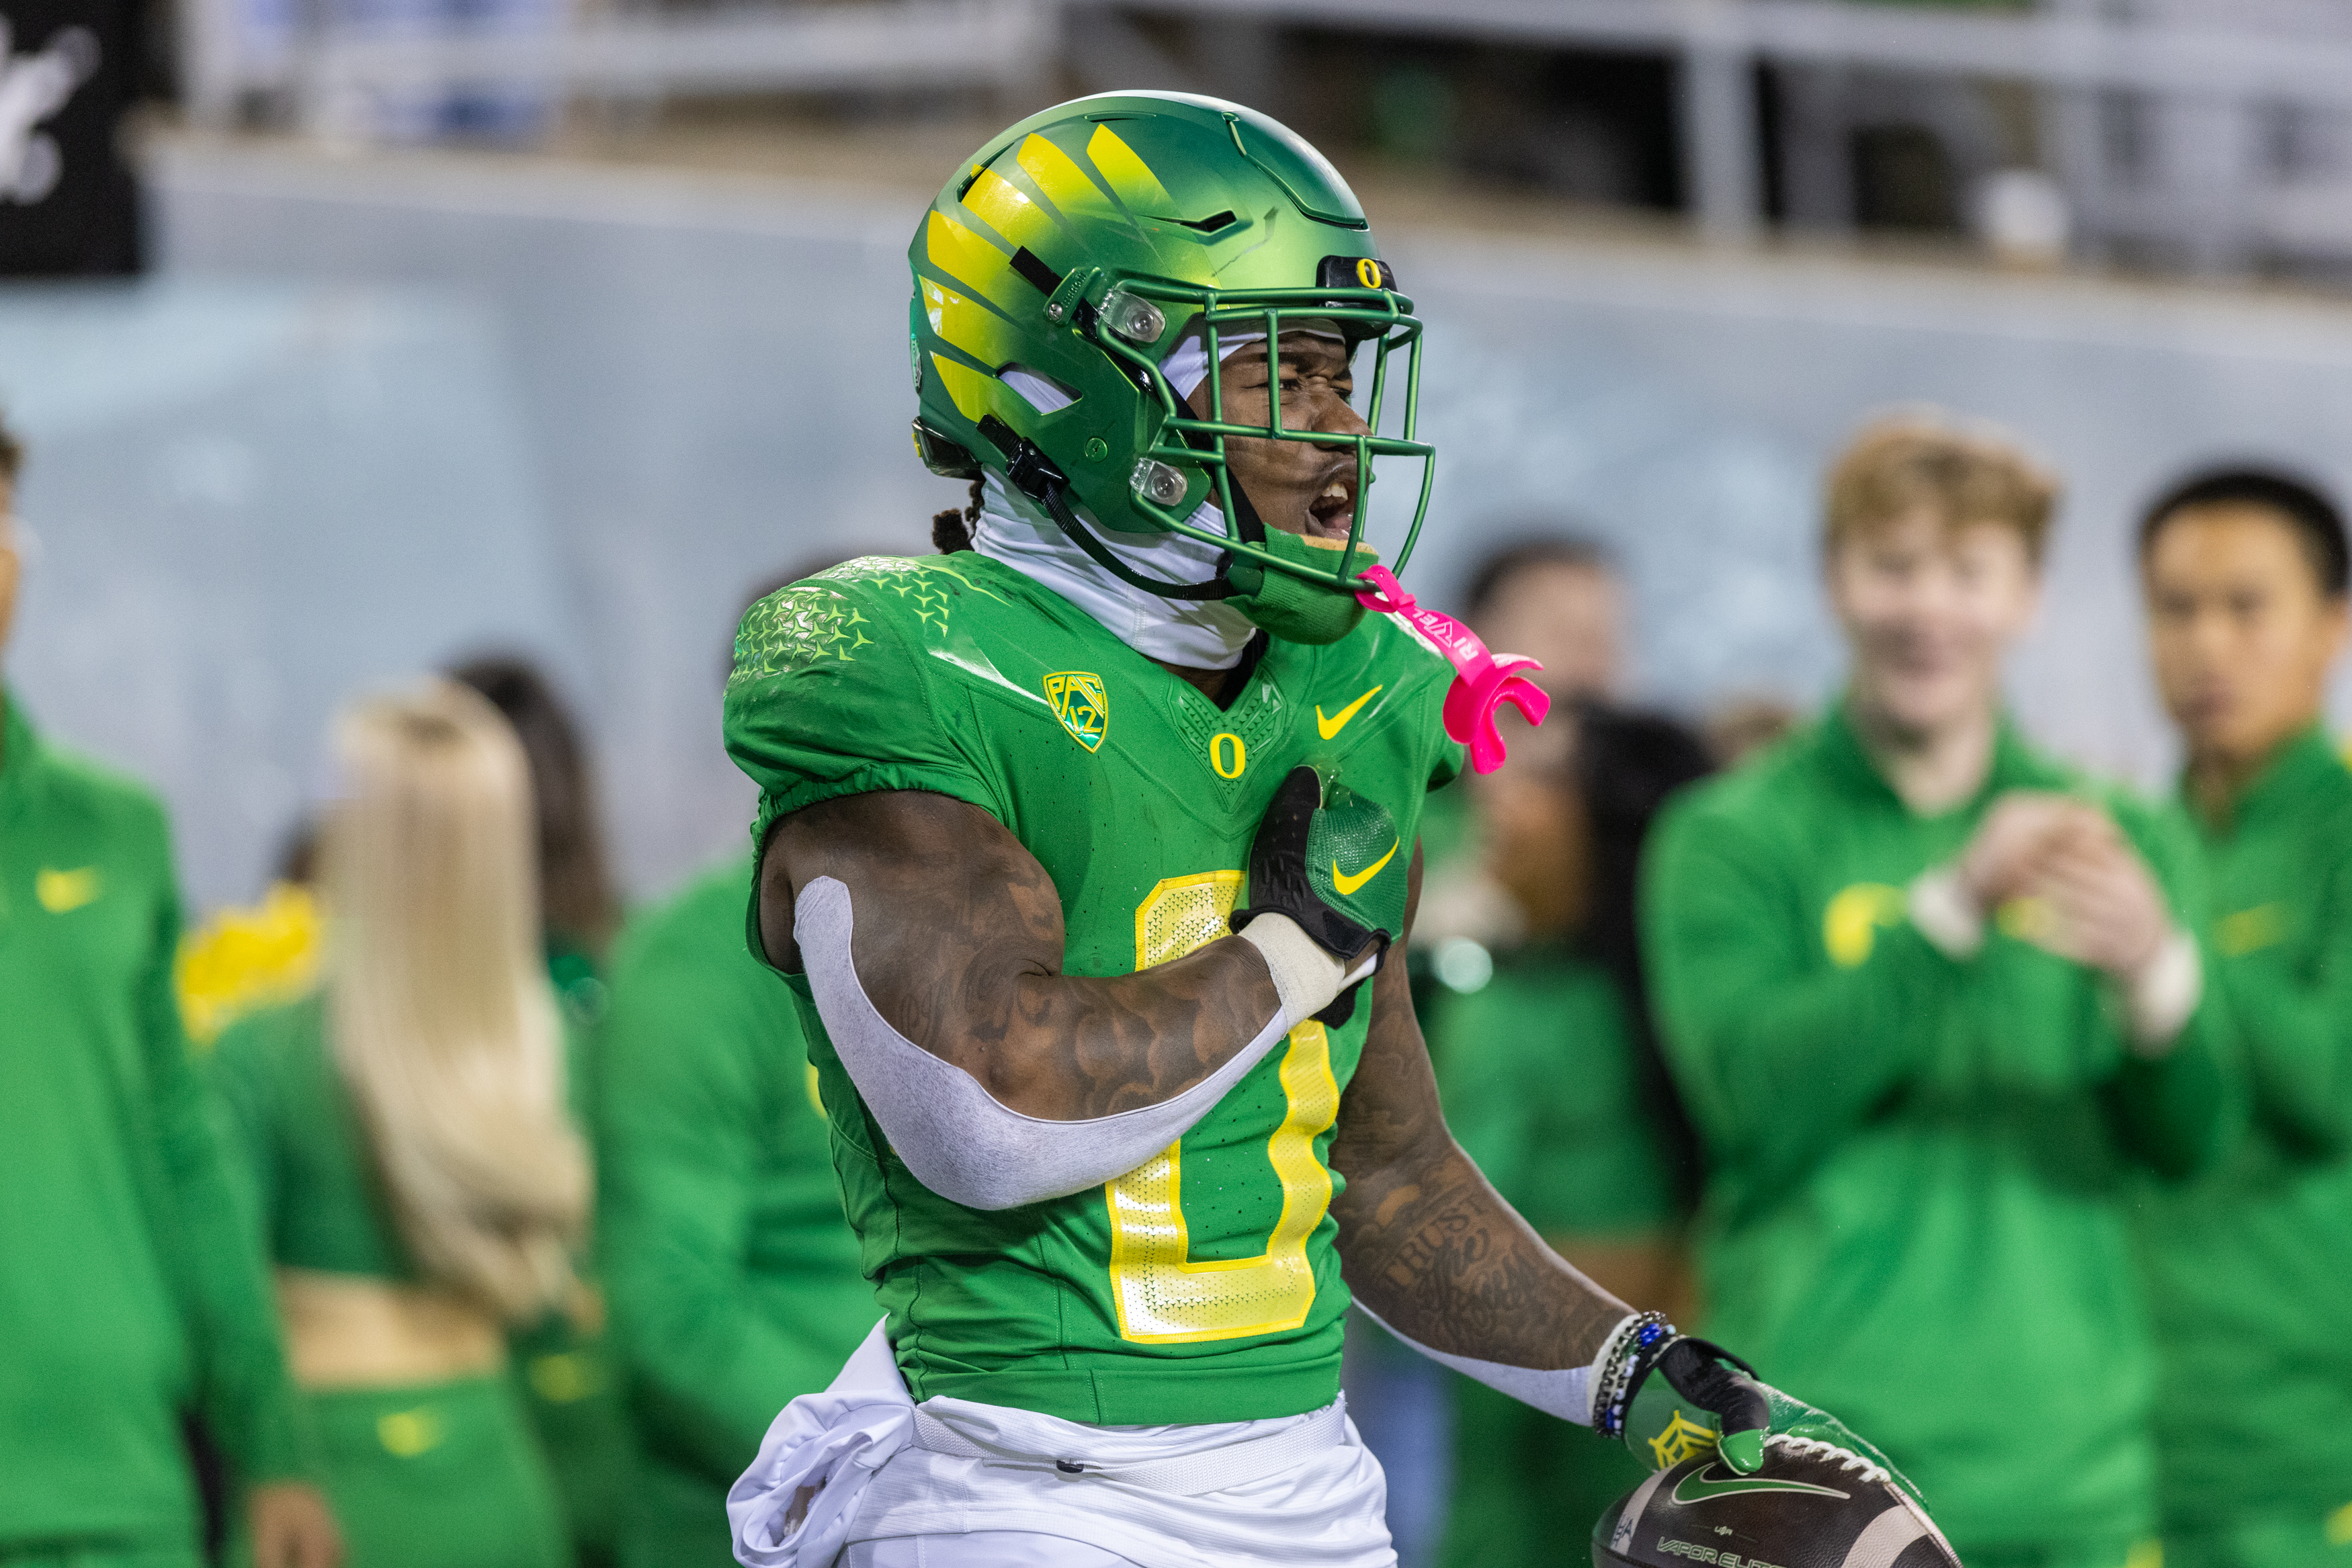 Oregon running back Bucky Irving to play in Fiesta Bowl, Dan Lanning says - oregonlive.com